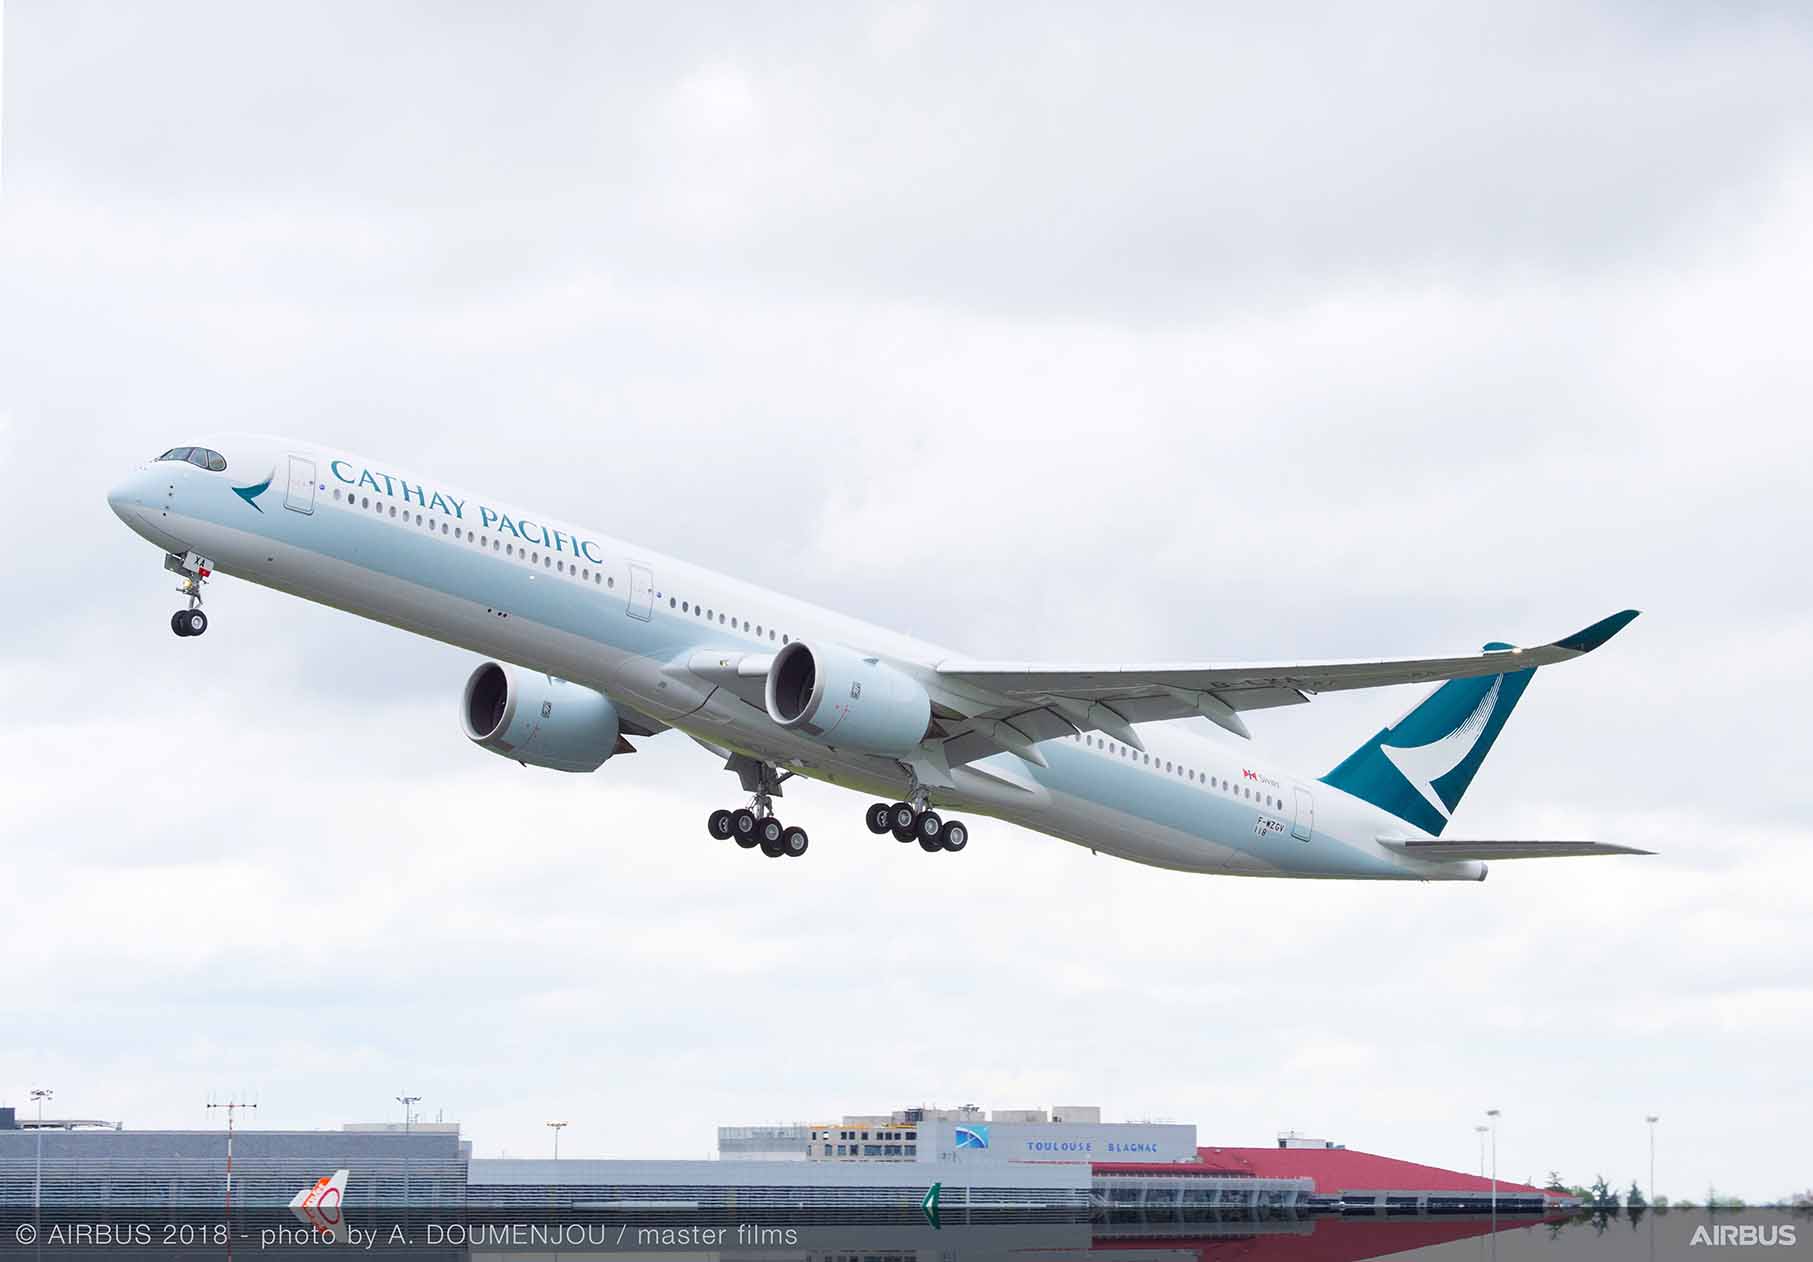 Cathay Pacific CEO warns of ‘challenging and uncertain’ short-term outlook